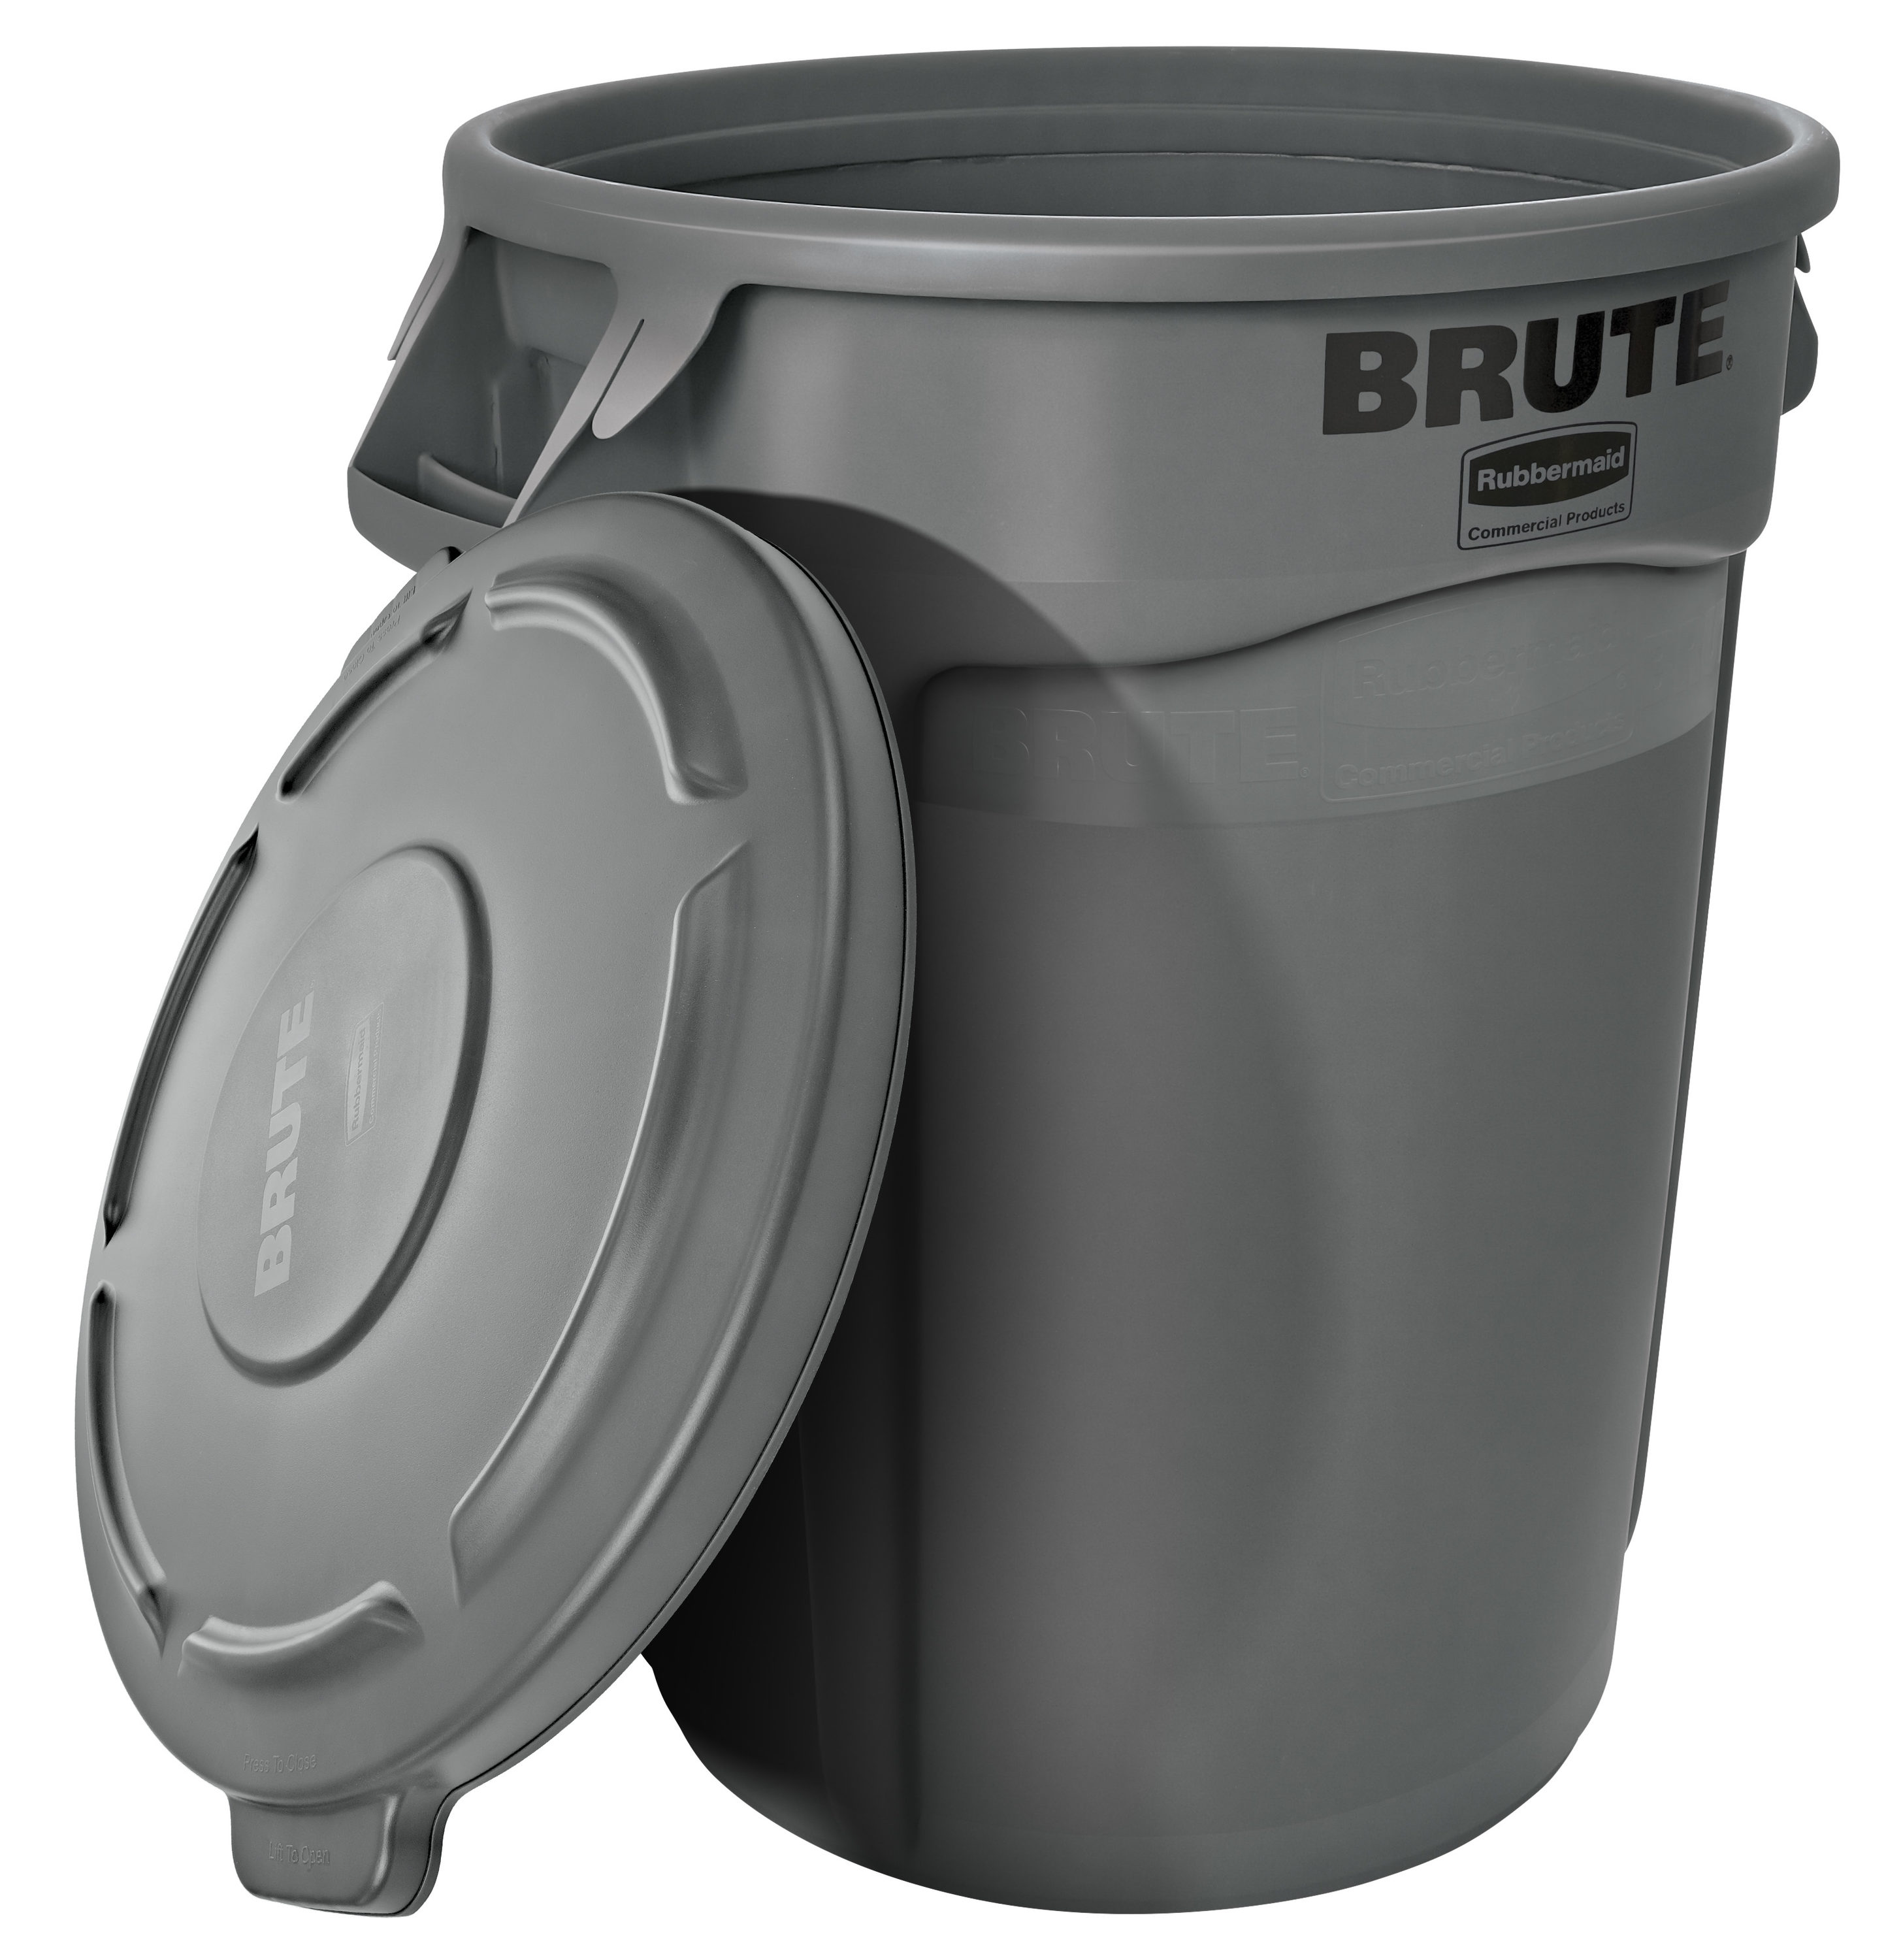 Details about   Rubbermaid Fg263100blue Brute Round  Blue  Trash Can 